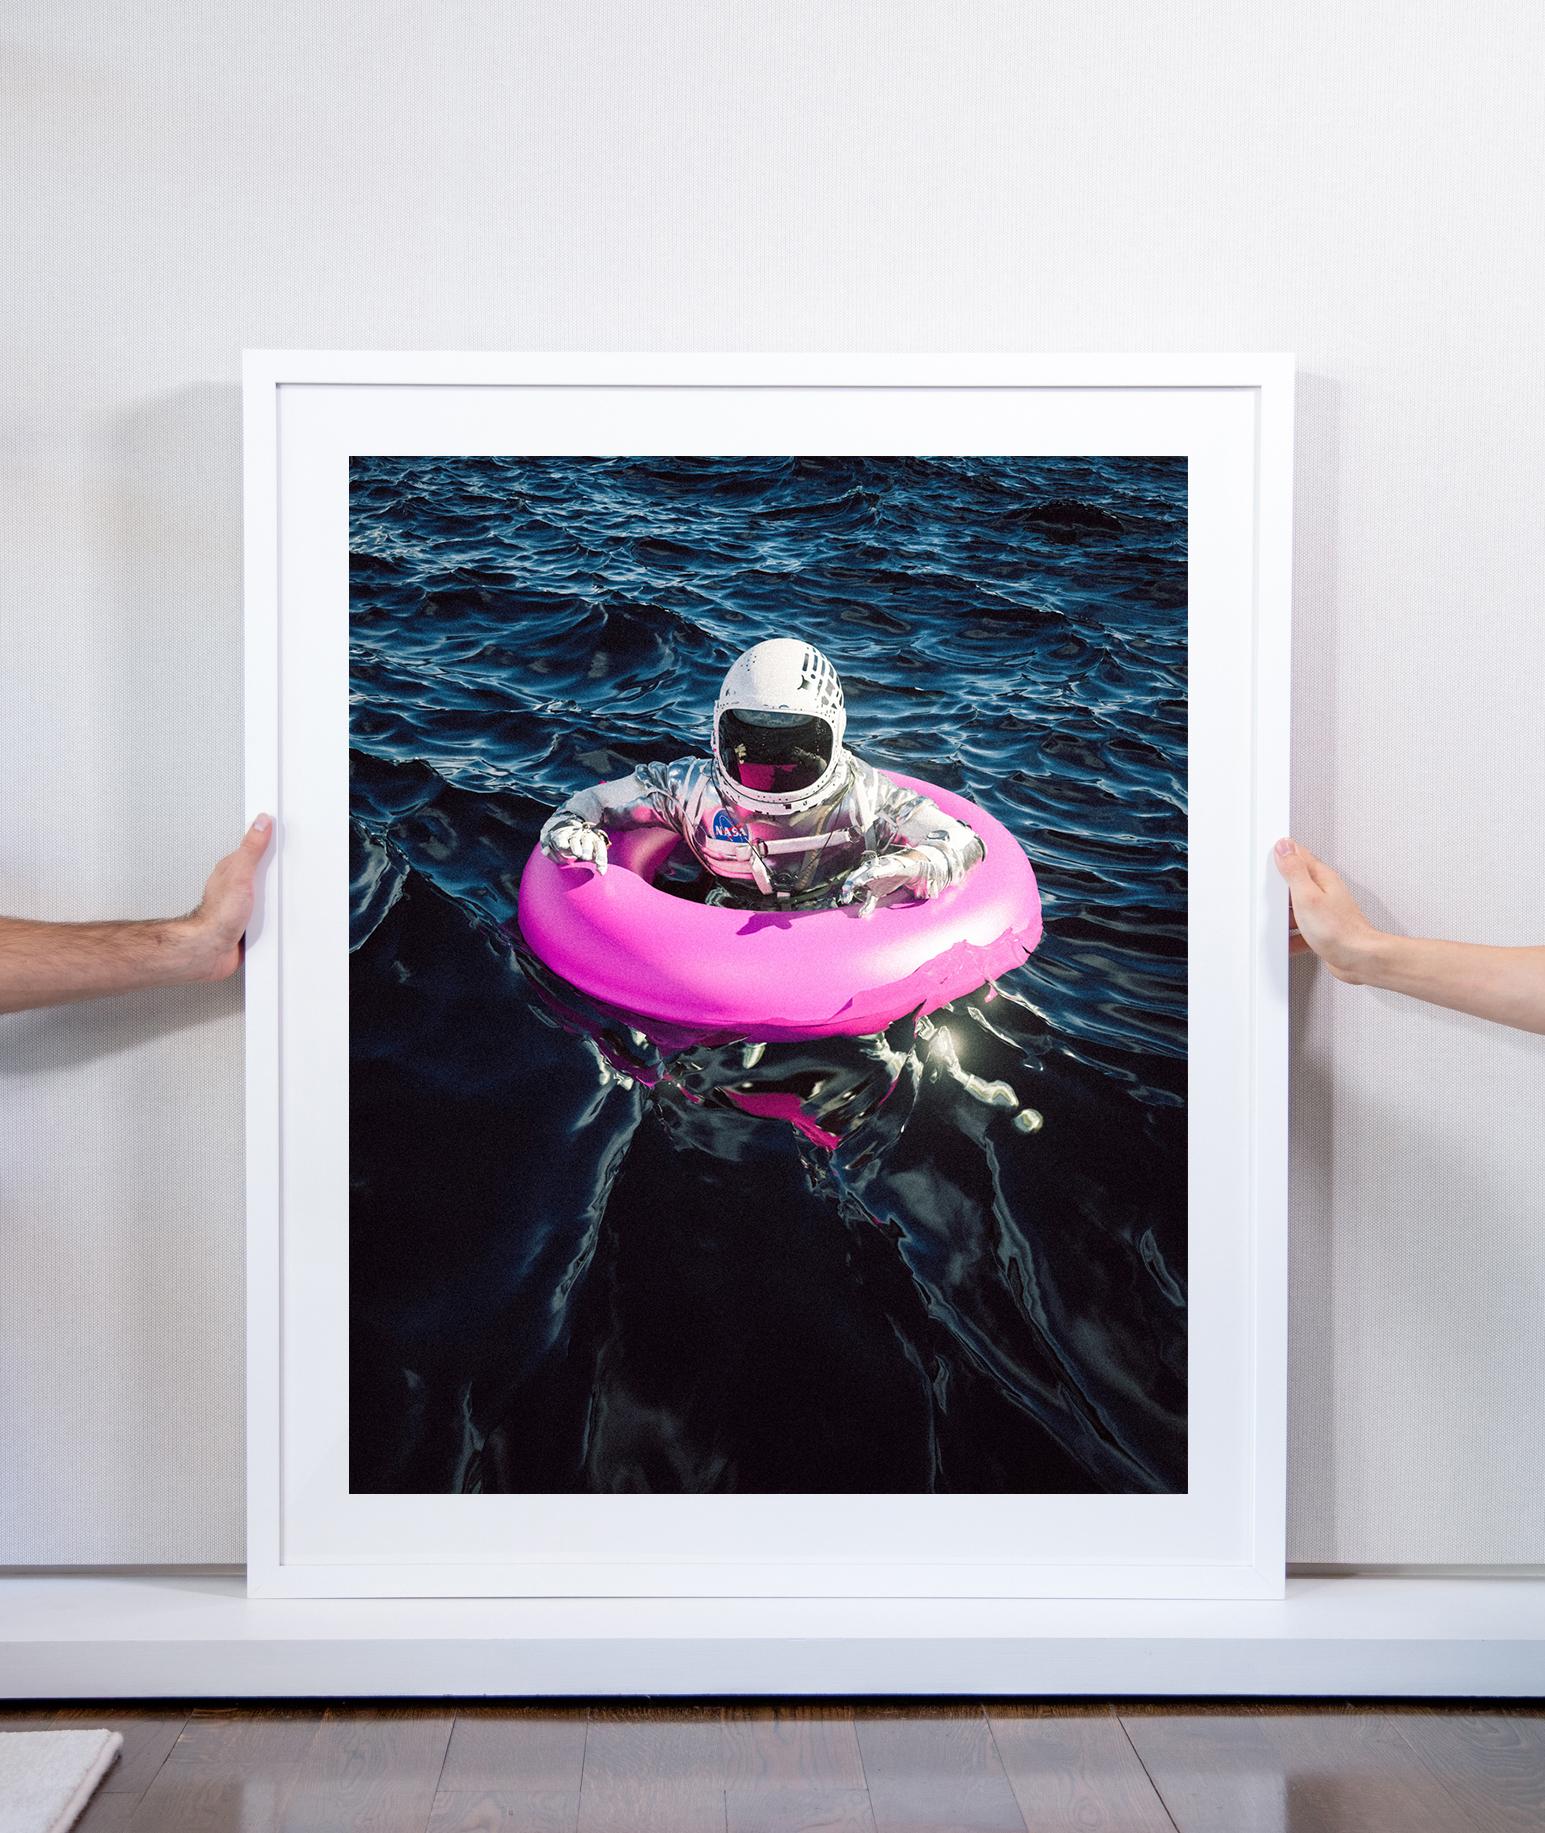 Astro Lost at Sea - Photograph by Cameron Burns